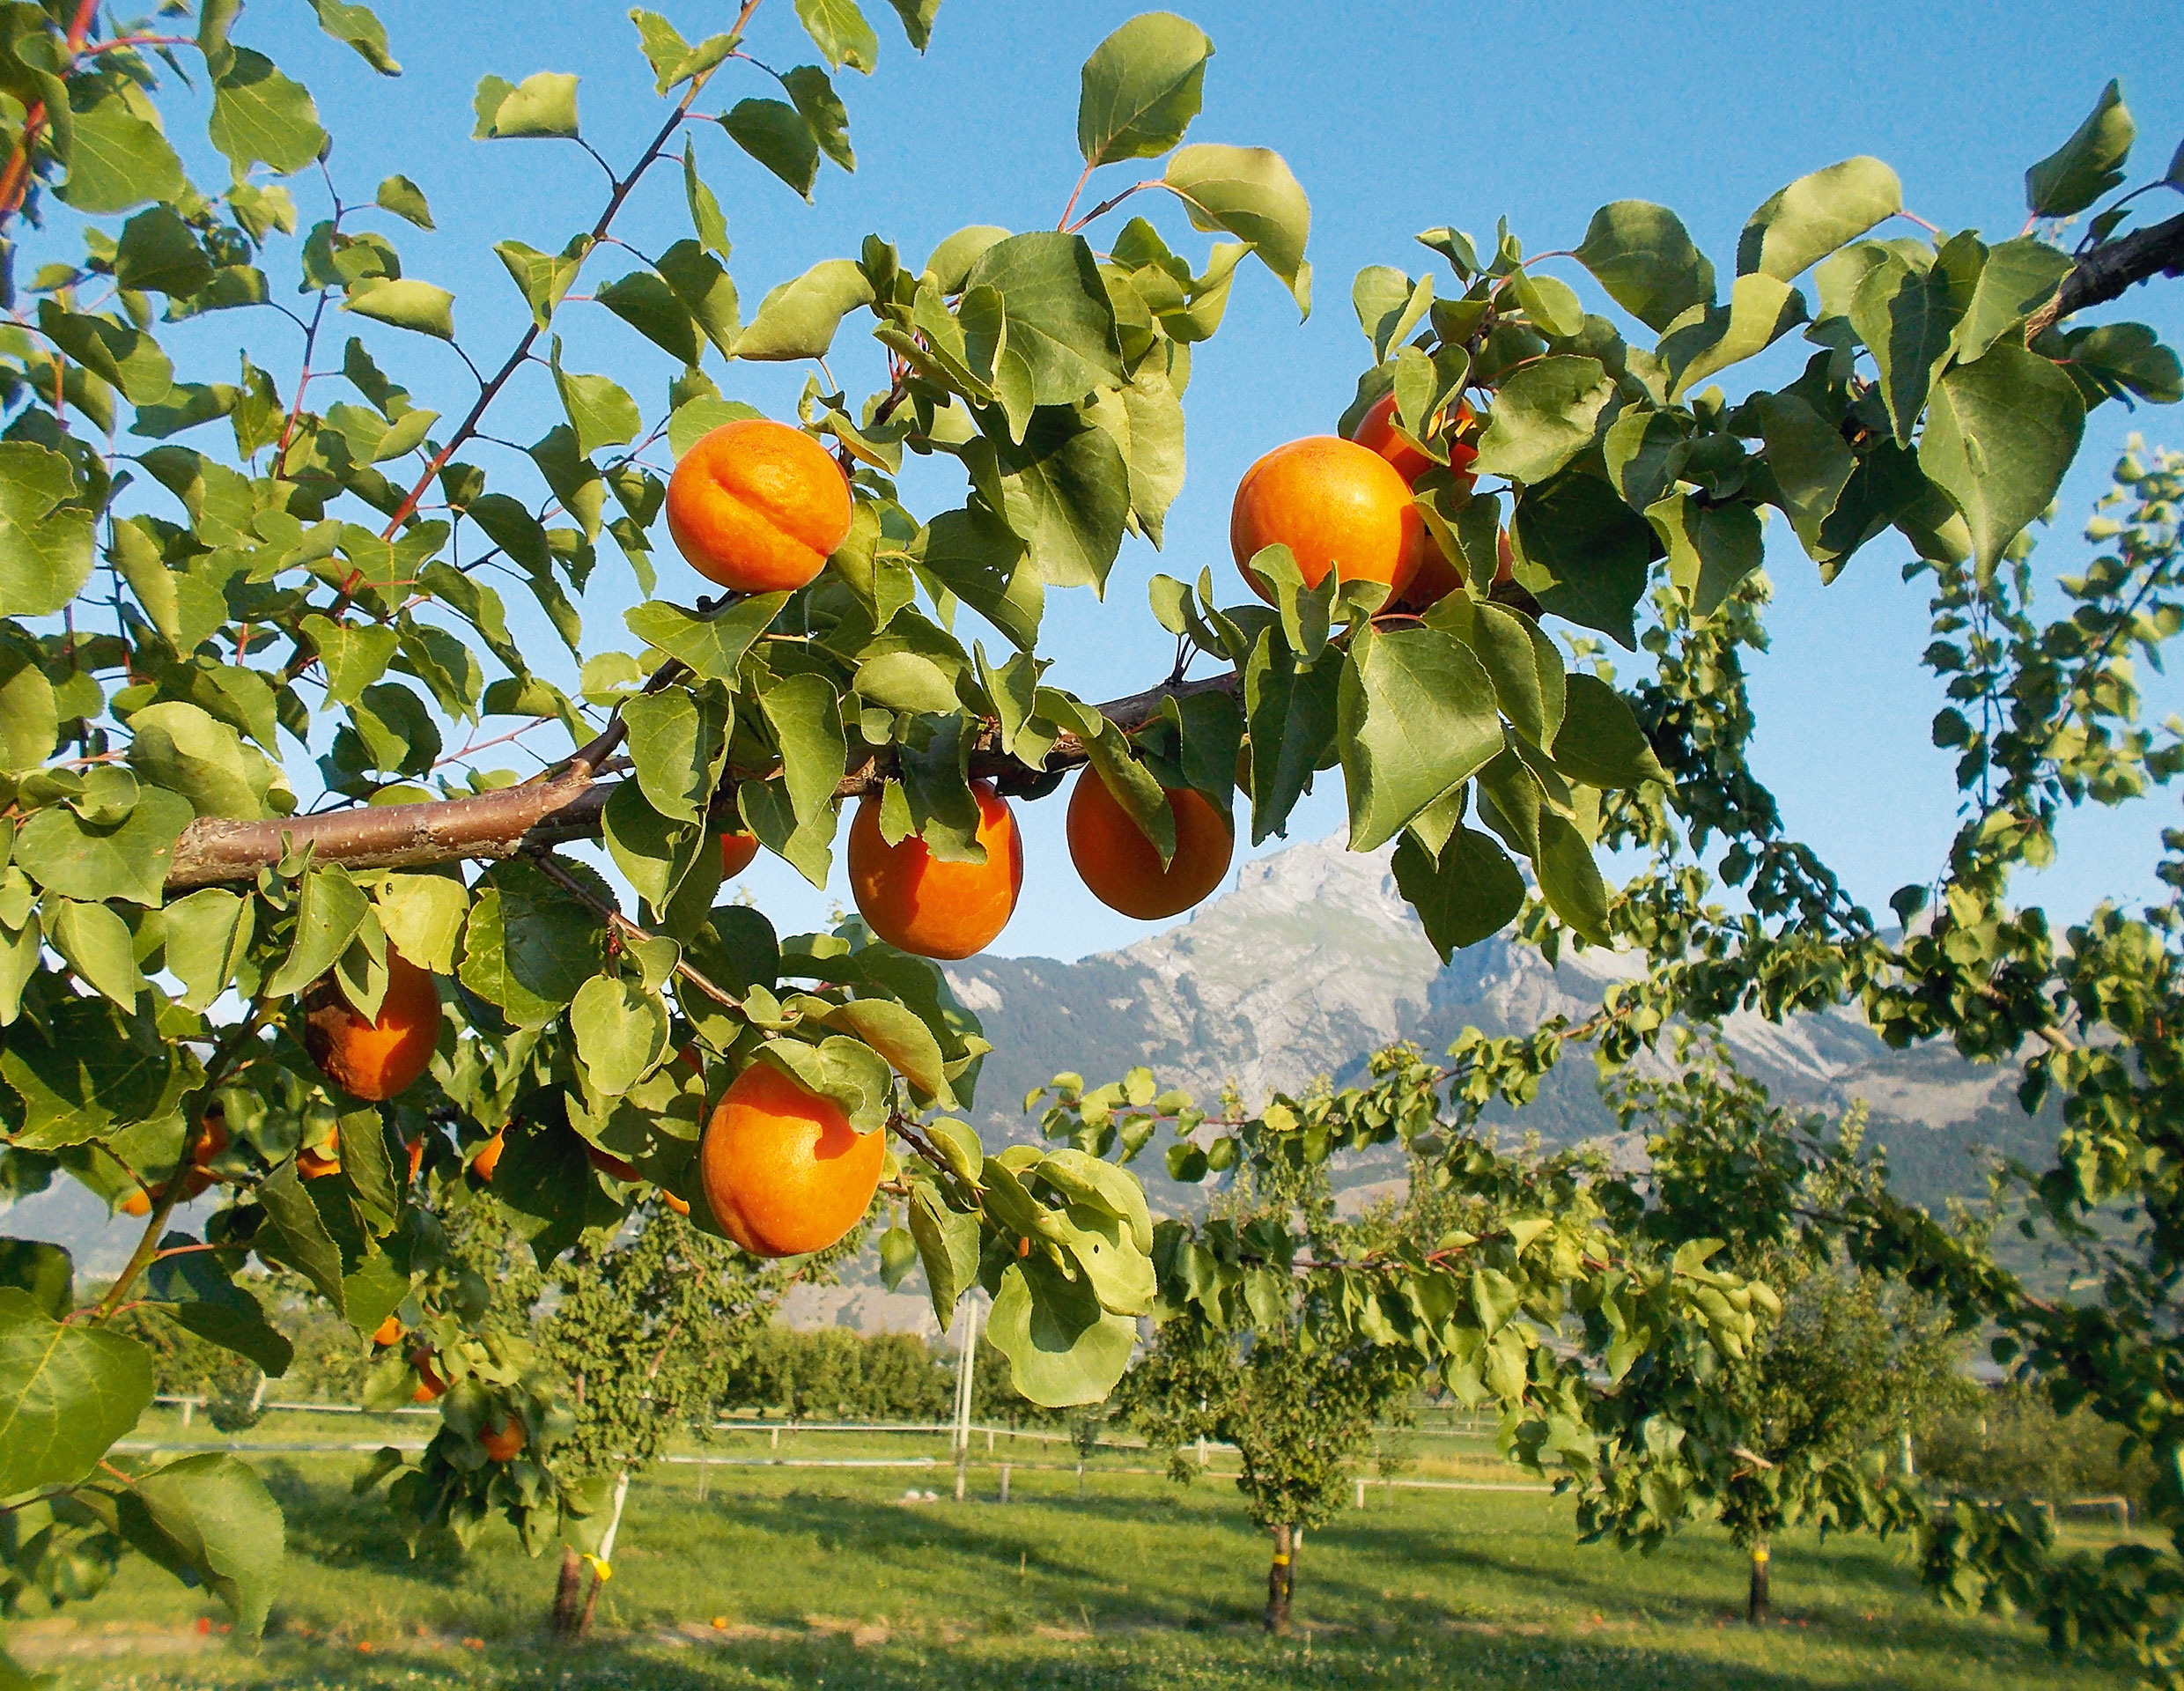 Apricot sector stakes in Valais: importance of the cultivar characteristics on farm viability